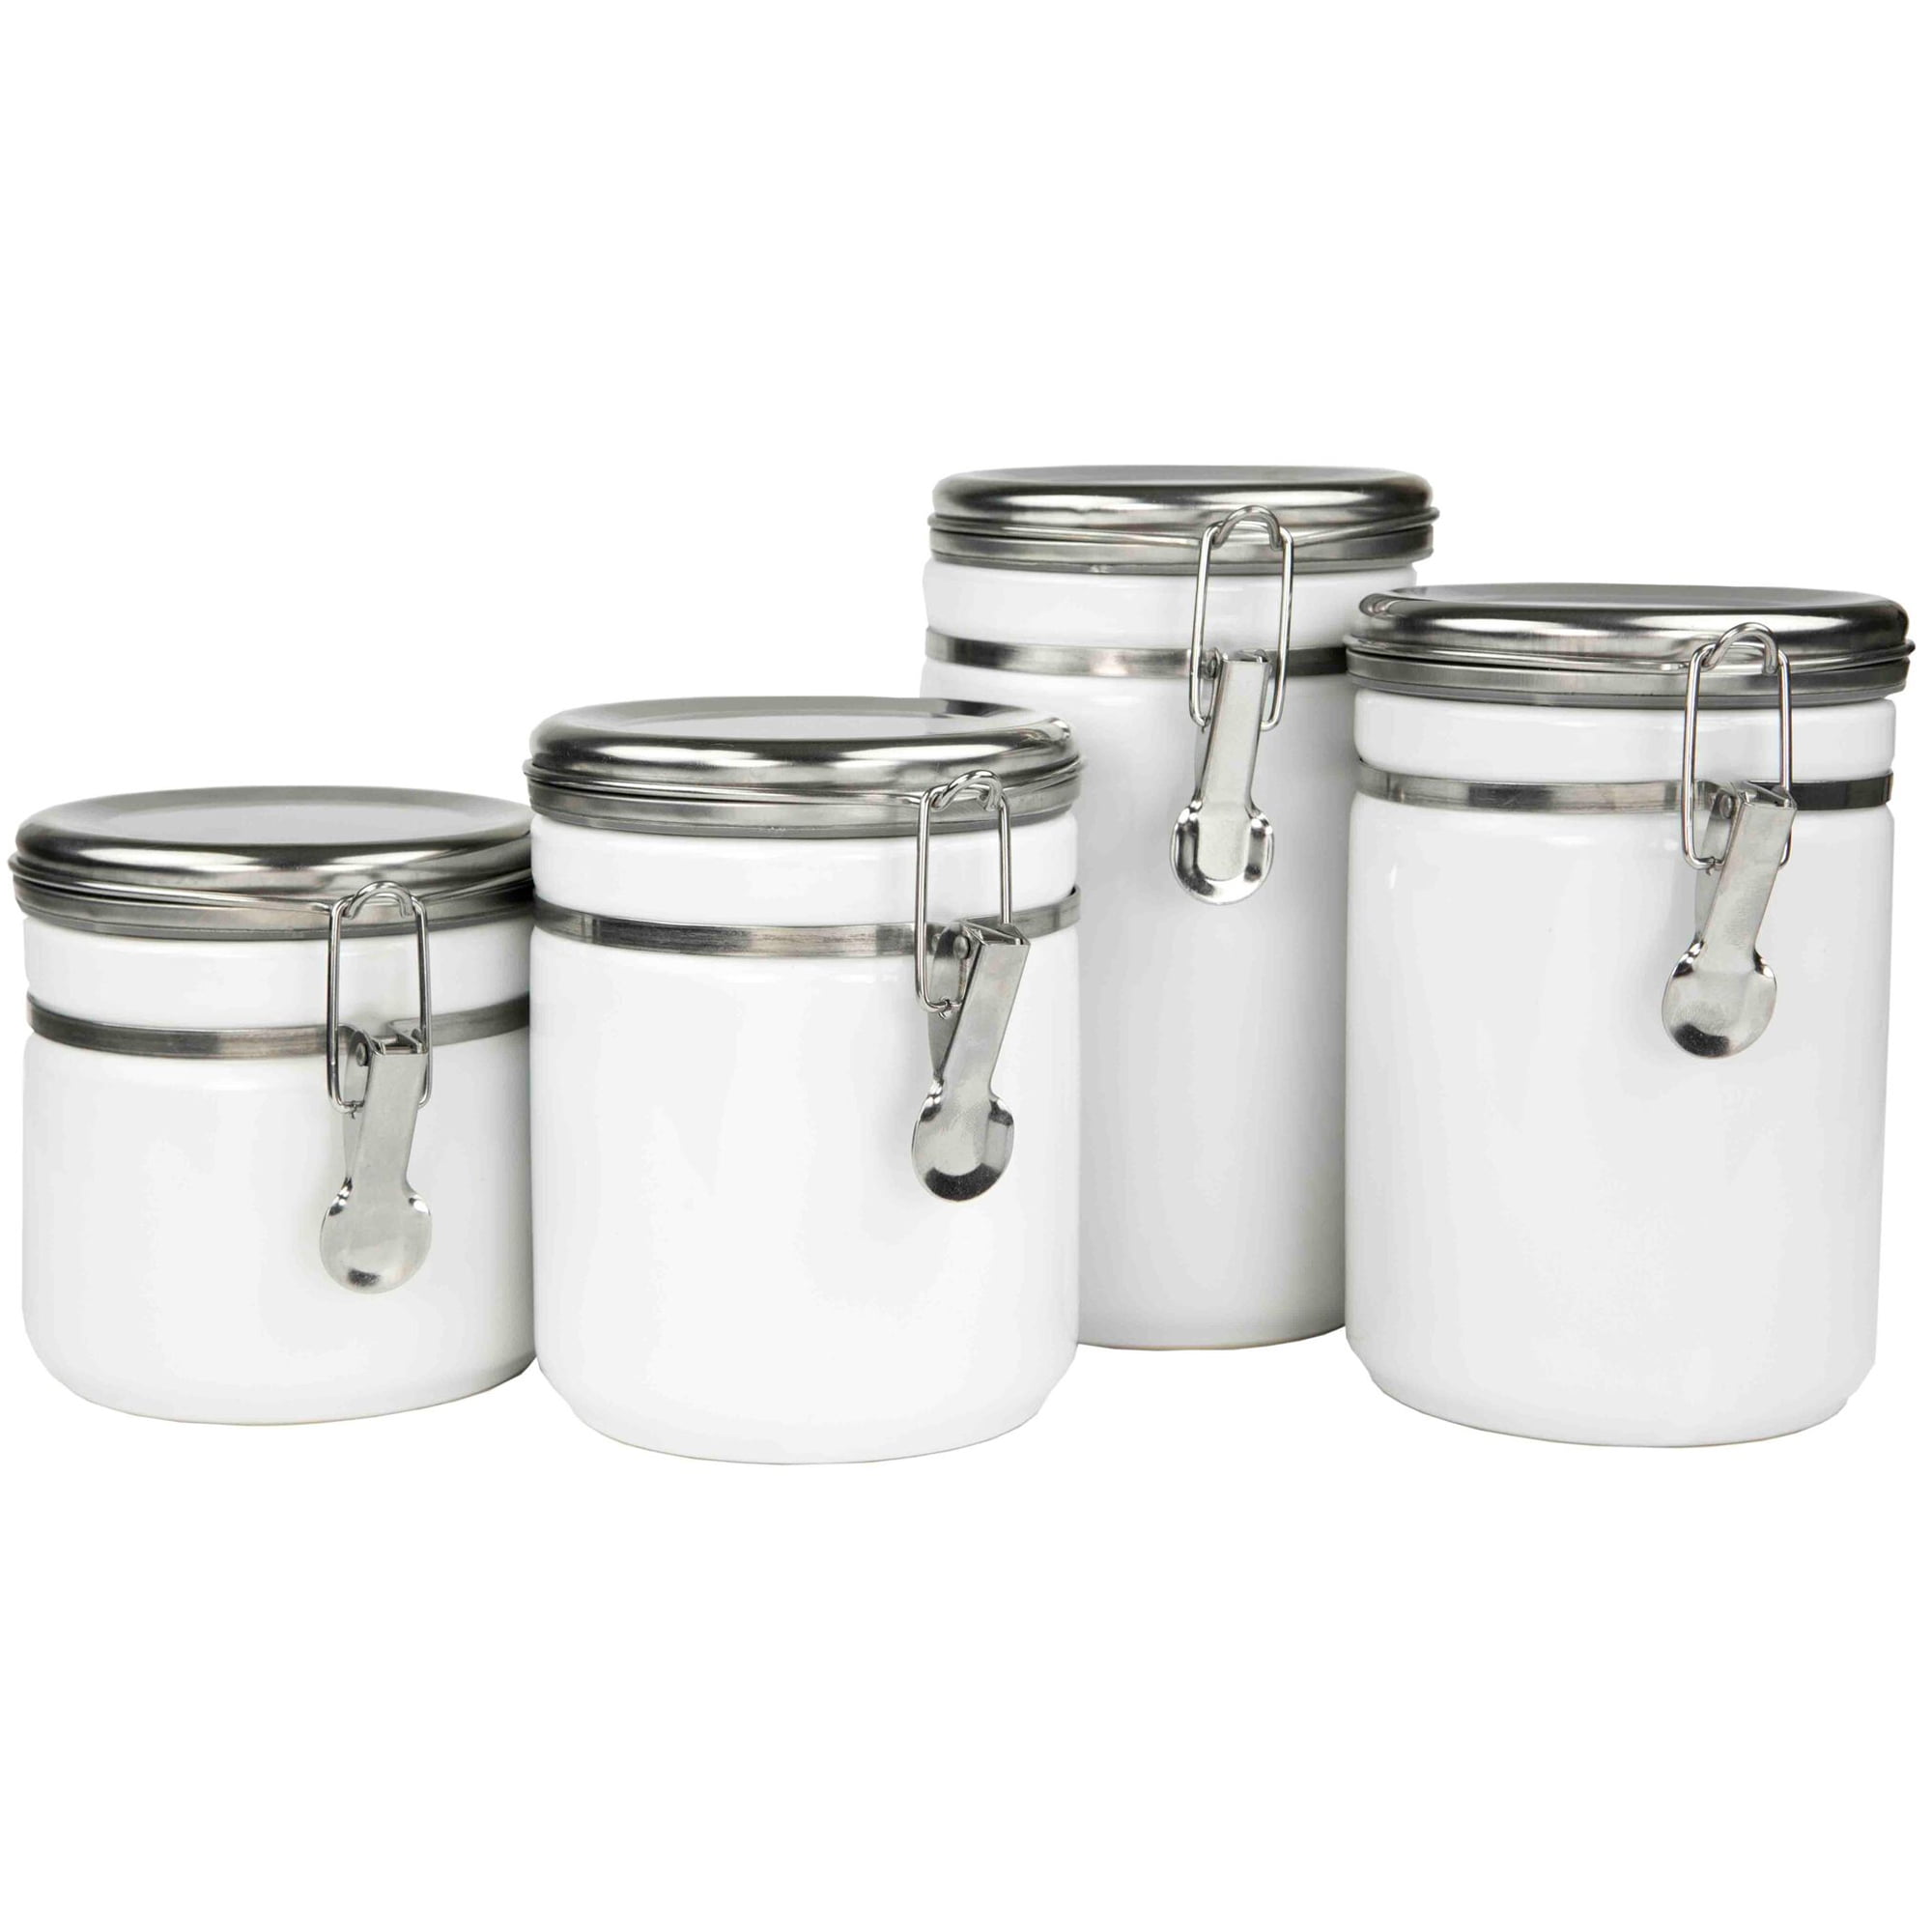 Home Basics White 4 Piece Ceramic Food Storage Canister Set Stainless